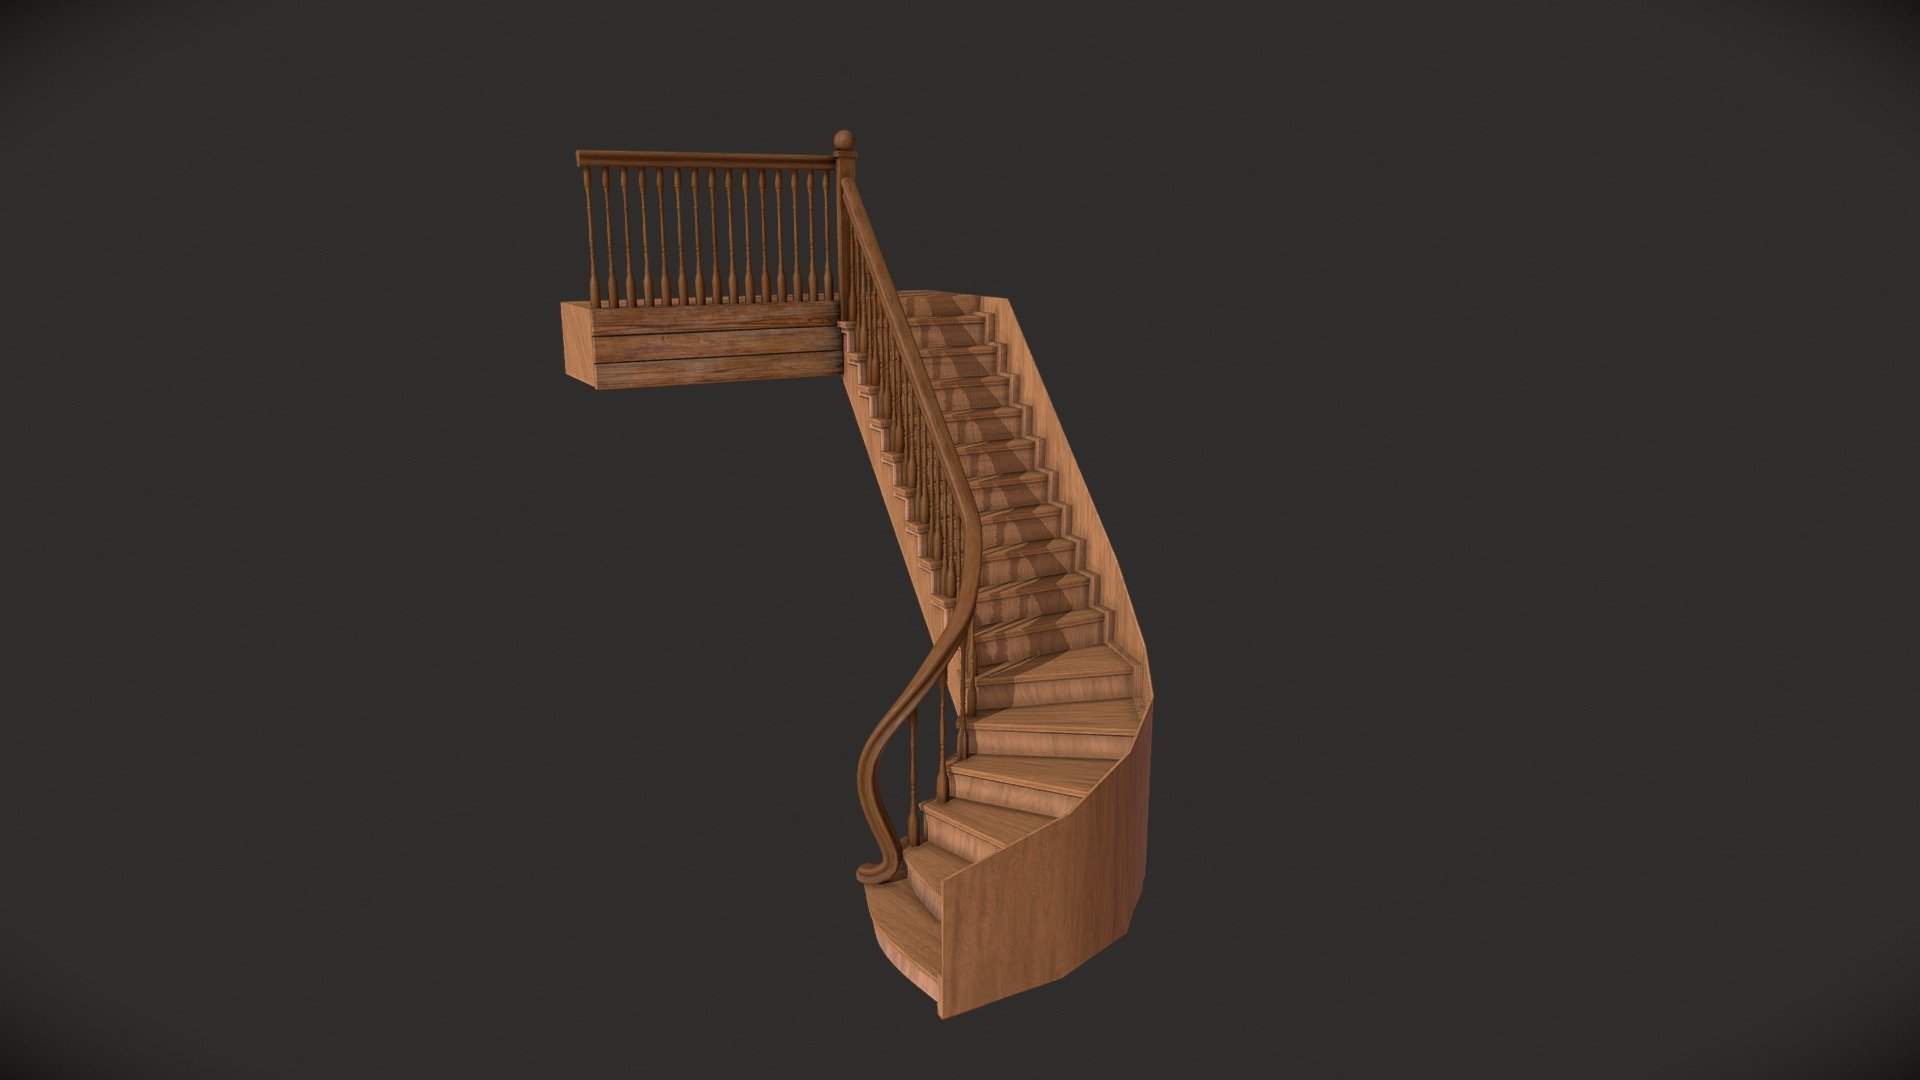 Model for augmented reality. Bespoke.

Ready for cooperation. Mail: hrofti-hroft@ya.ru

** Tools:** Staircase - Blender. Texture - Substance Painter. 

My ArtStation https://www.artstation.com/hrofti
 



 - Wooden staircase (Stairs) - Download Free 3D model by Hrofti 3d model